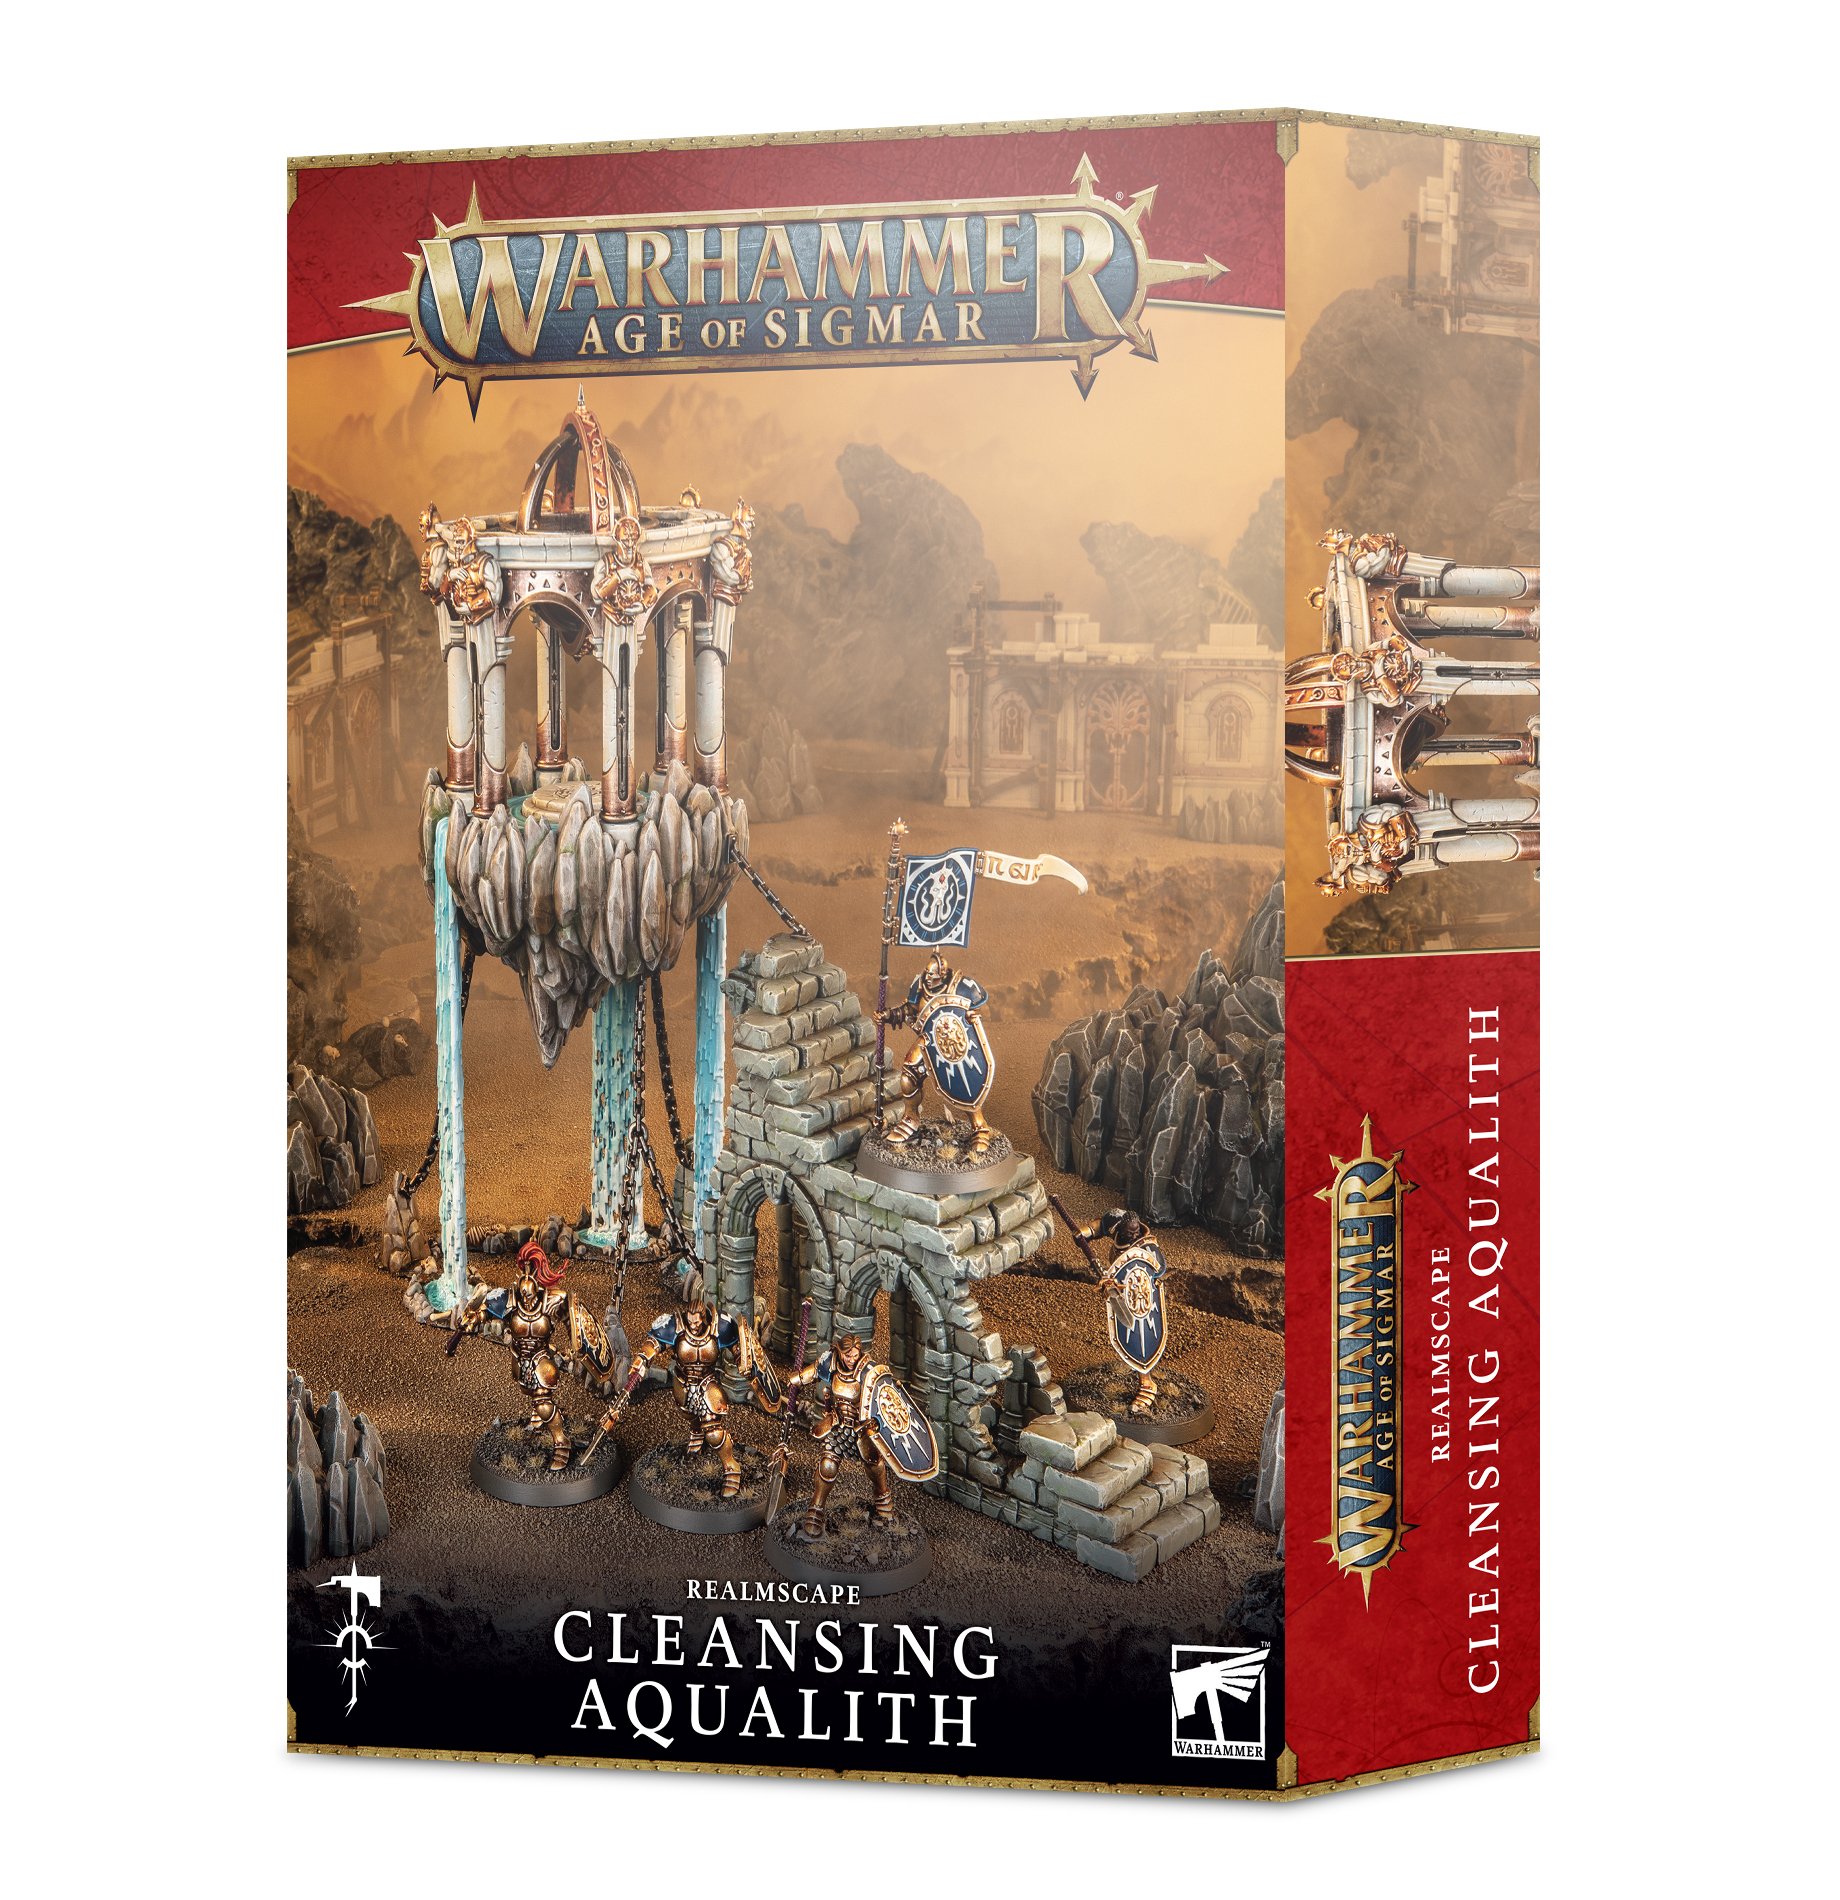 Cleansing Aqualith - Realmscape - 60-51 - Warhammer Age Of Sigmar